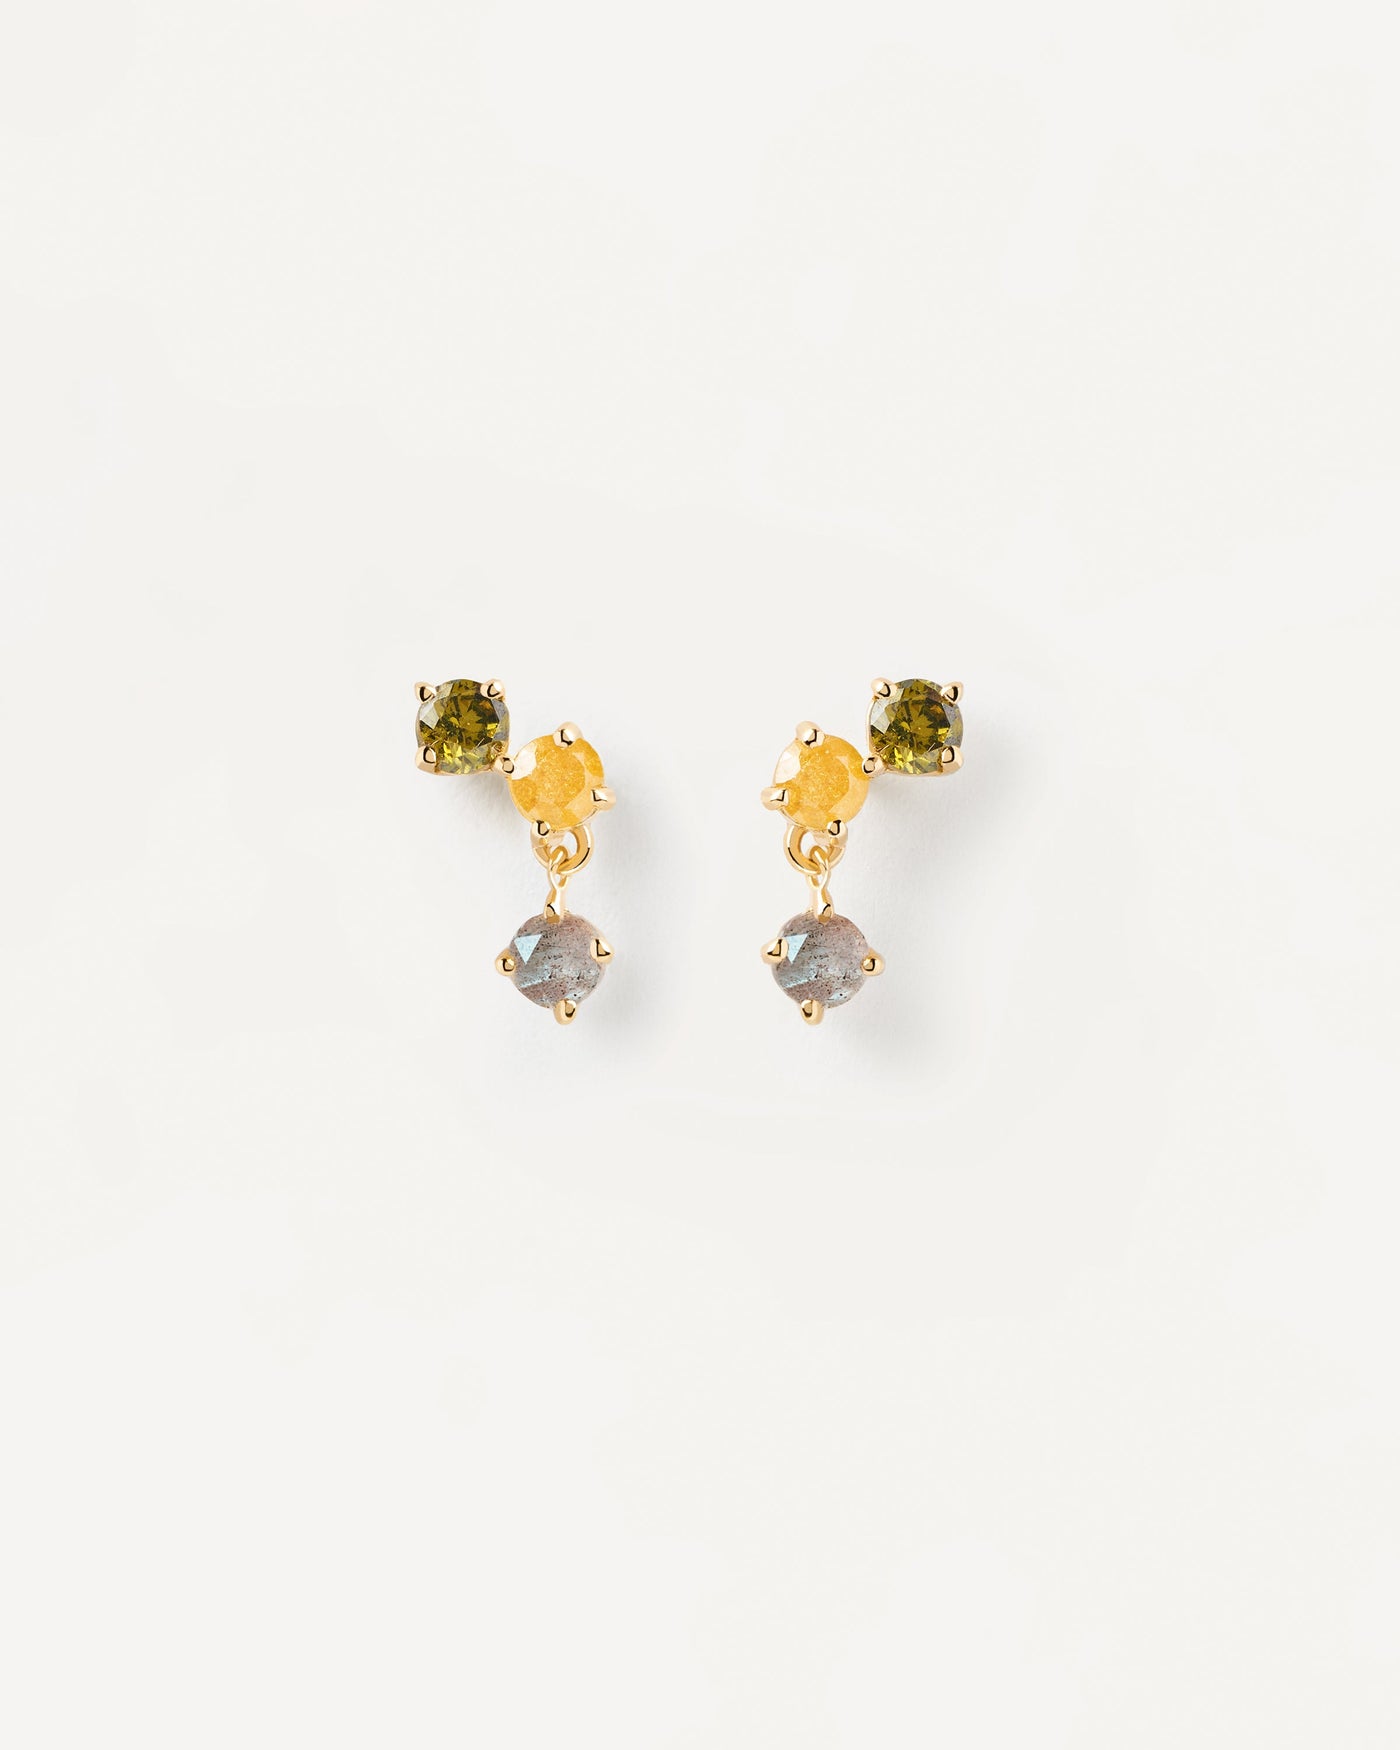 2023 Selection | Flora Earrings. Dainty gold-plated earrings with zirconias. Get the latest arrival from PDPAOLA. Place your order safely and get this Best Seller. Free Shipping.